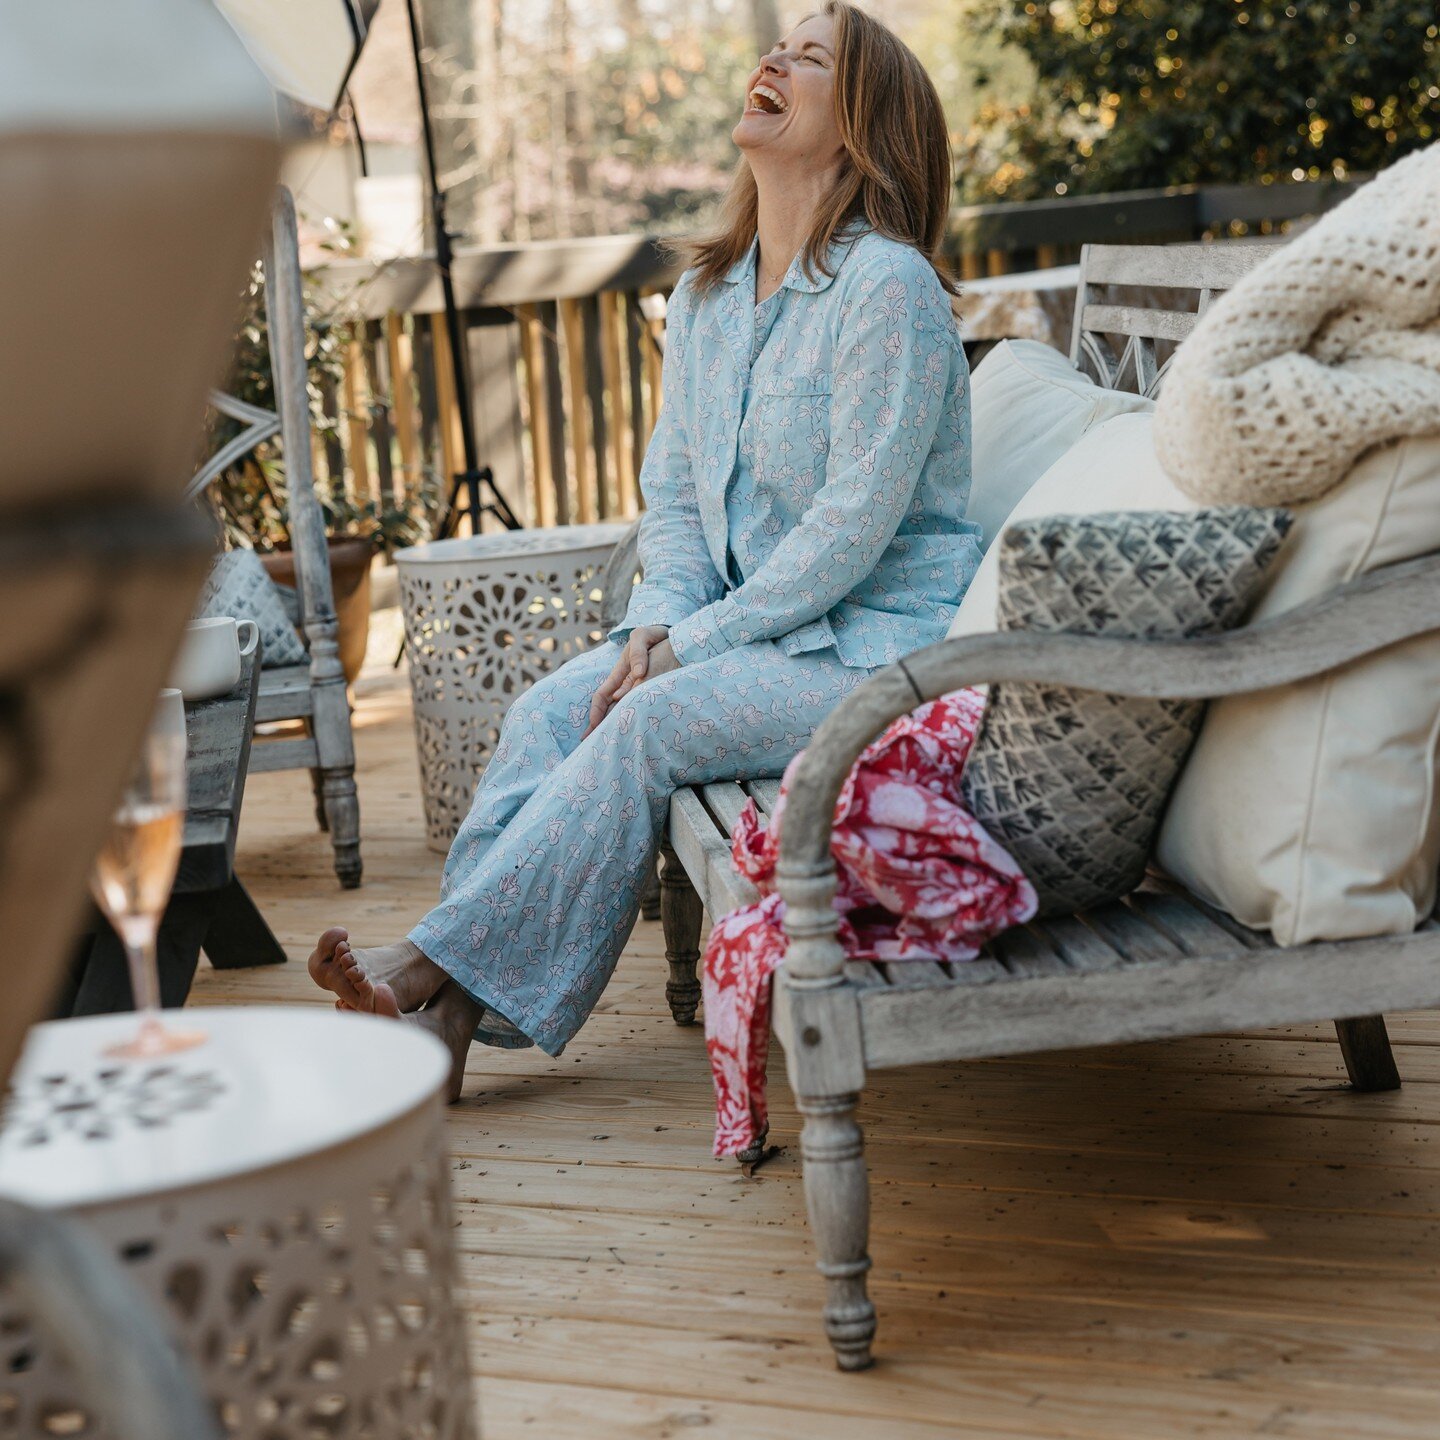 Laugh your way into dreamland! 😄💤 There's something about slipping into these Hendley pajamas that instantly puts you in a state of blissful relaxation. 😍✨ Not only do they feel incredibly soft against your skin, but they also work wonders in help